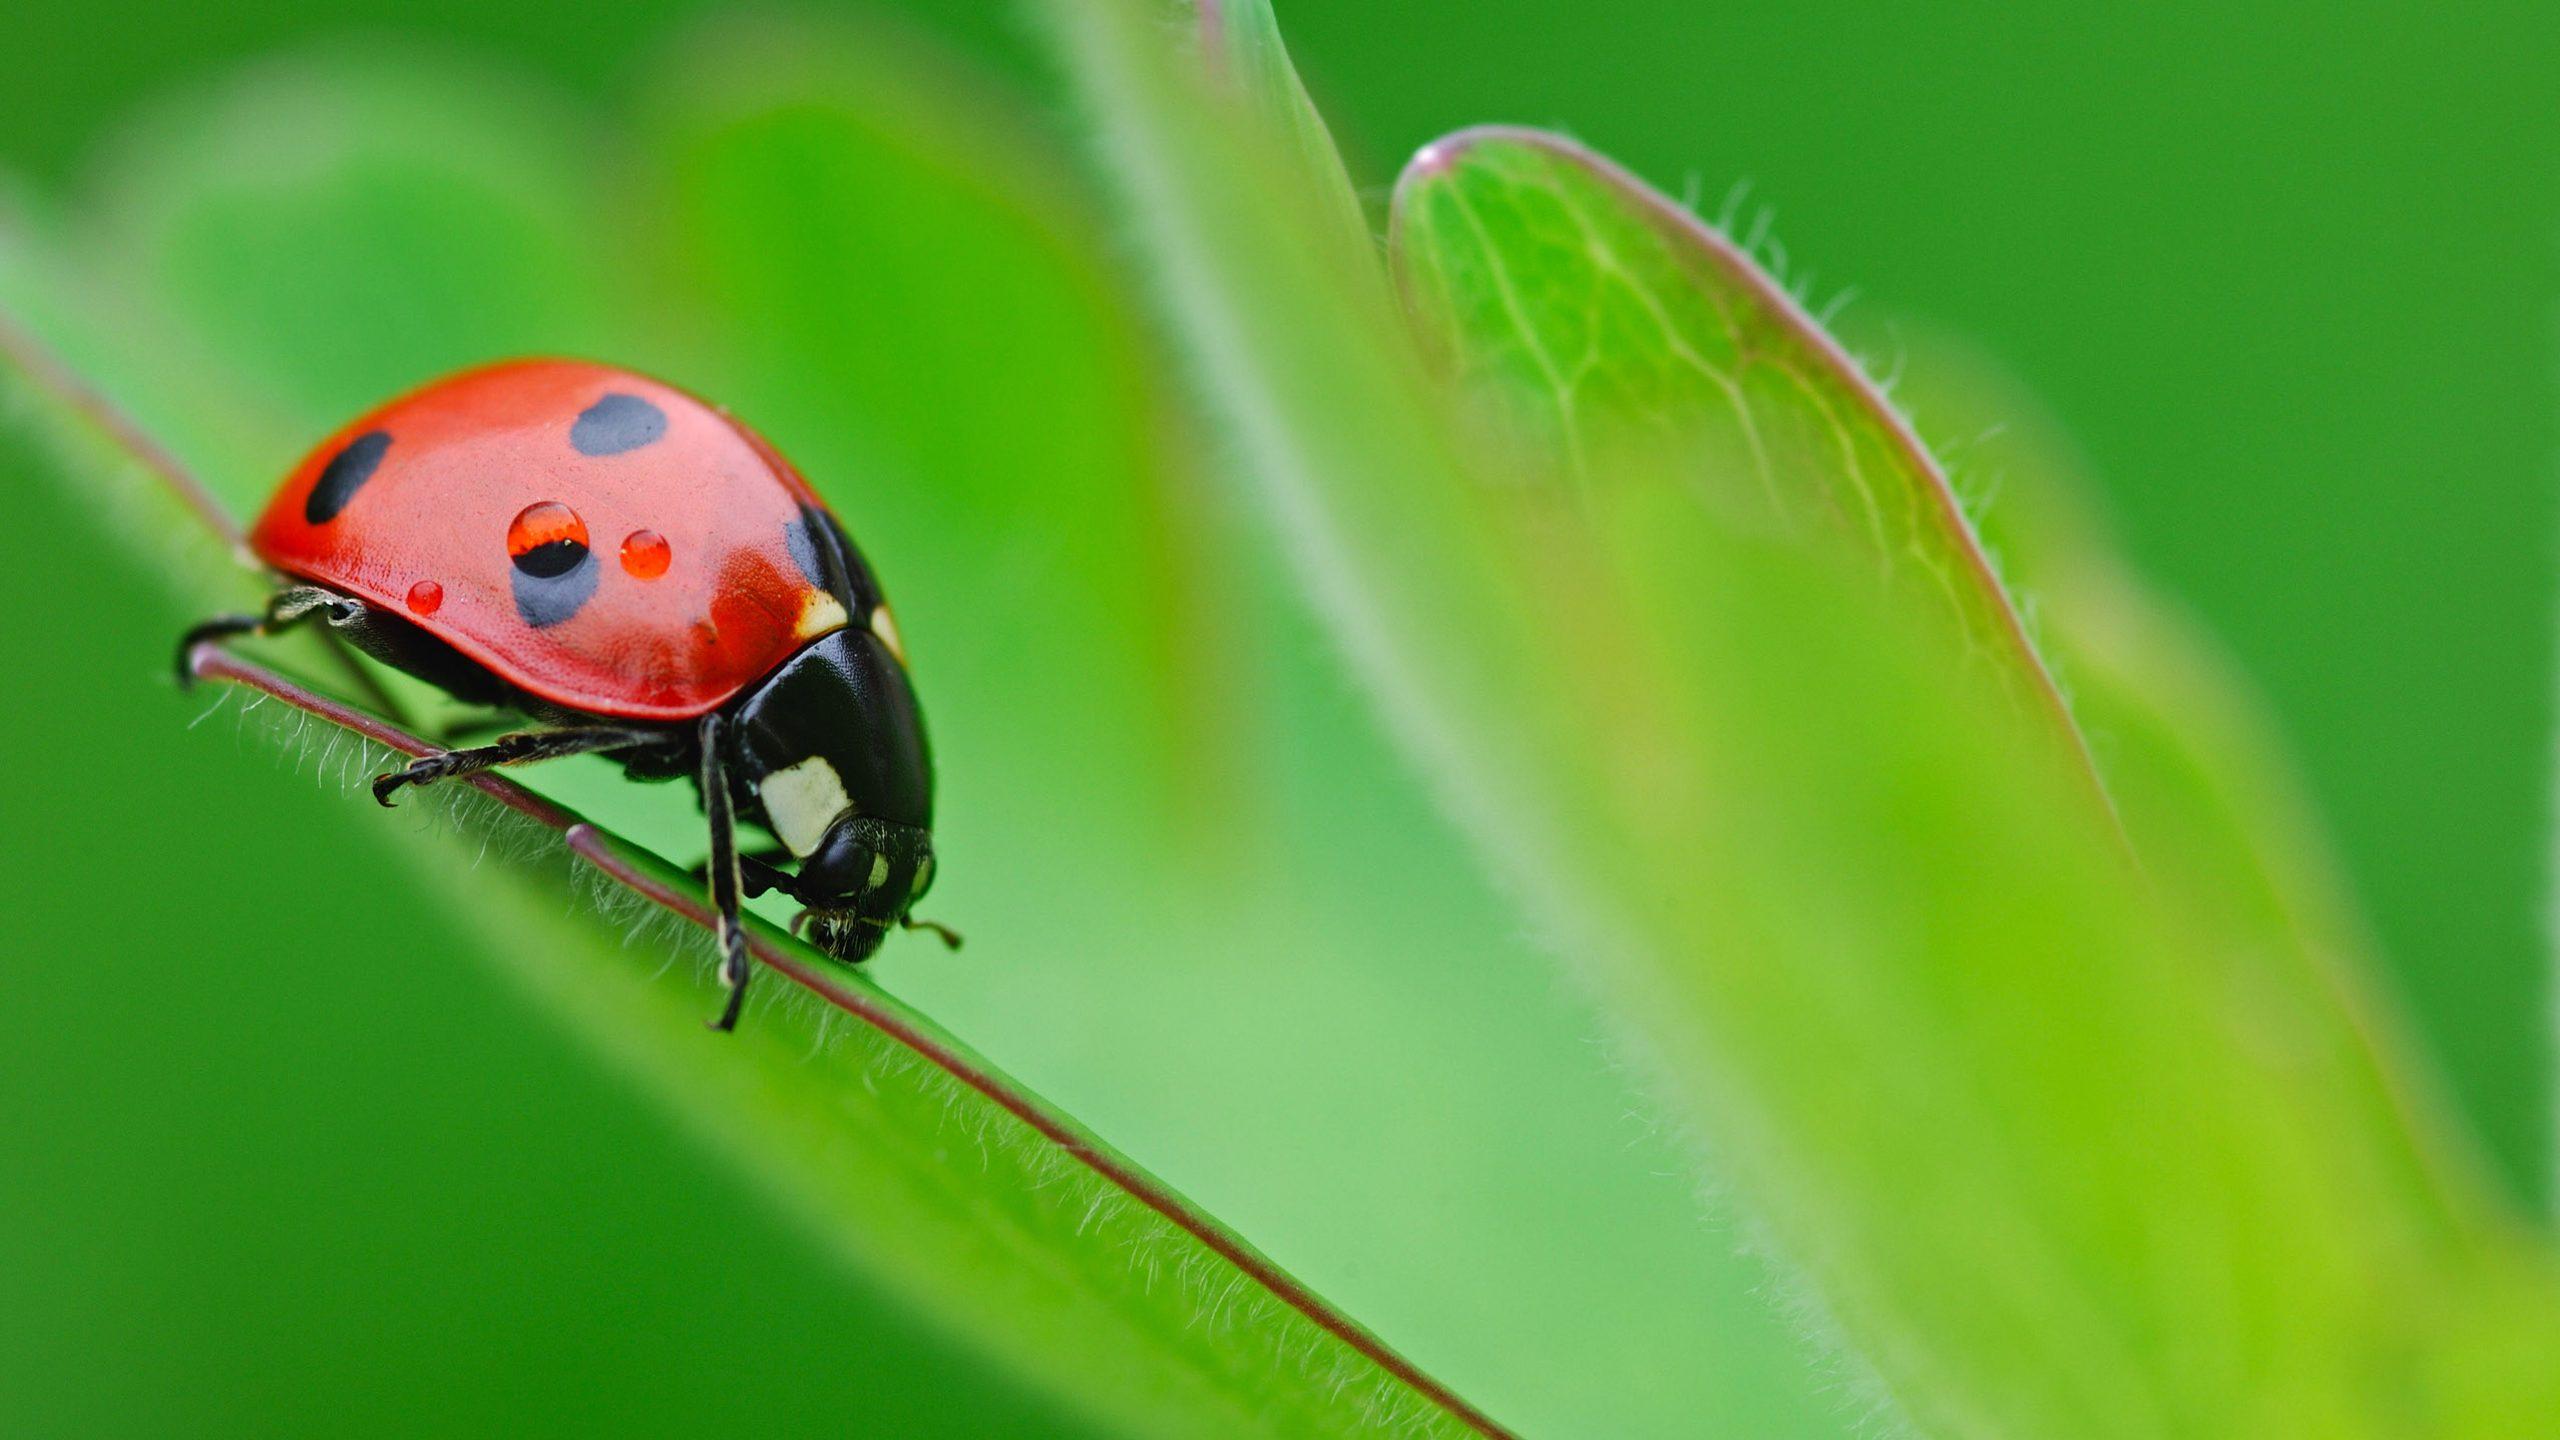 HD Wallpaper Of A Pretty Ladybird Beetle On A Green Plant